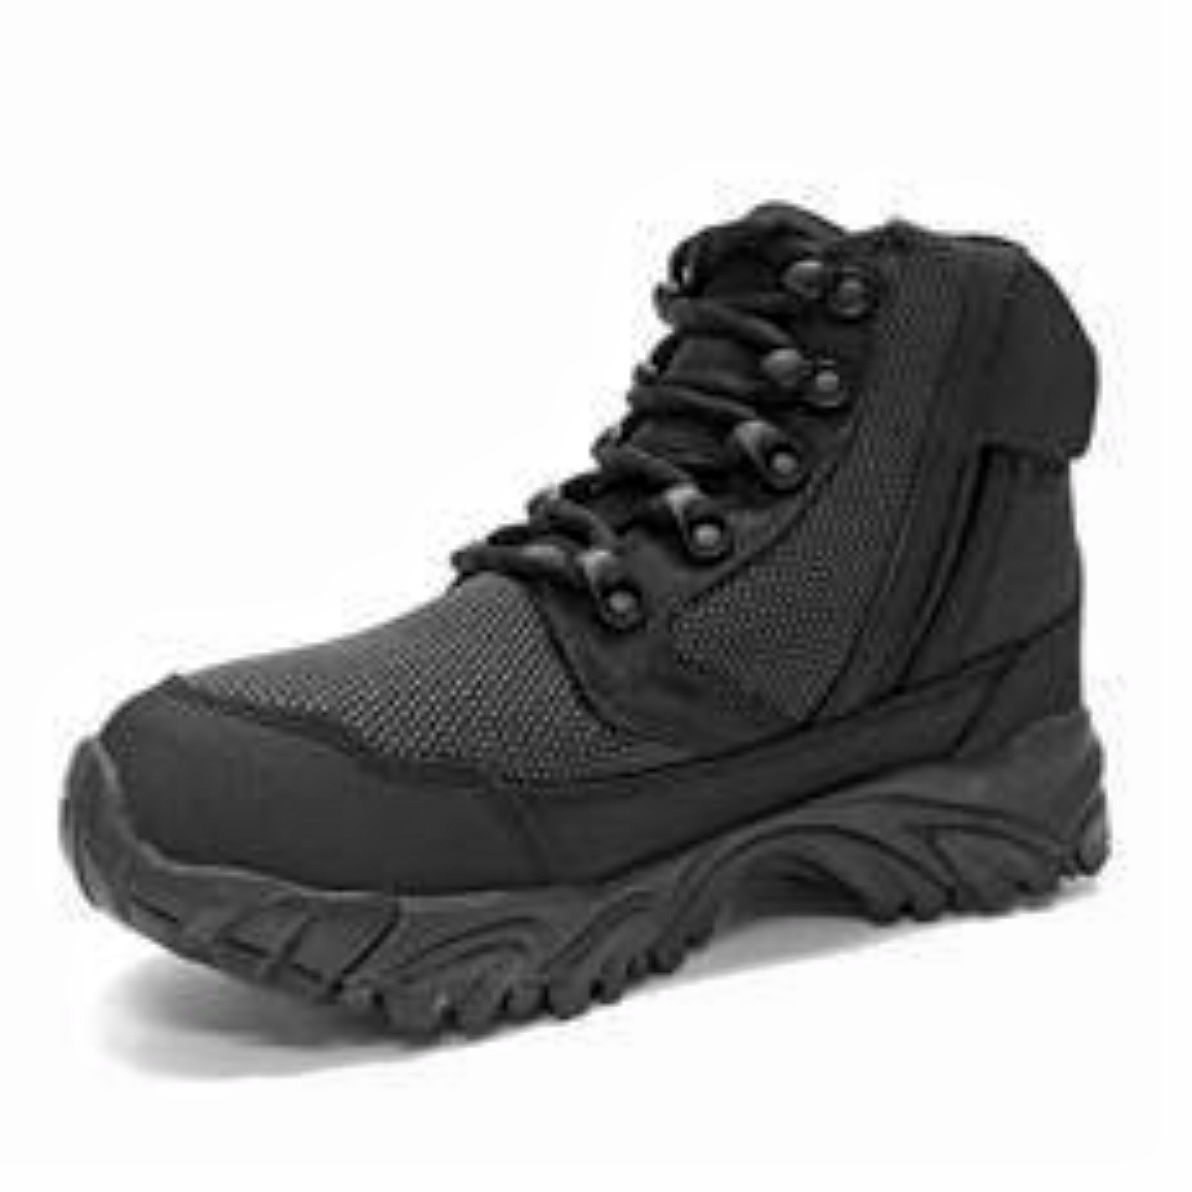 Altai - MF Super Fabric Tactical Boots 6" Side Zip